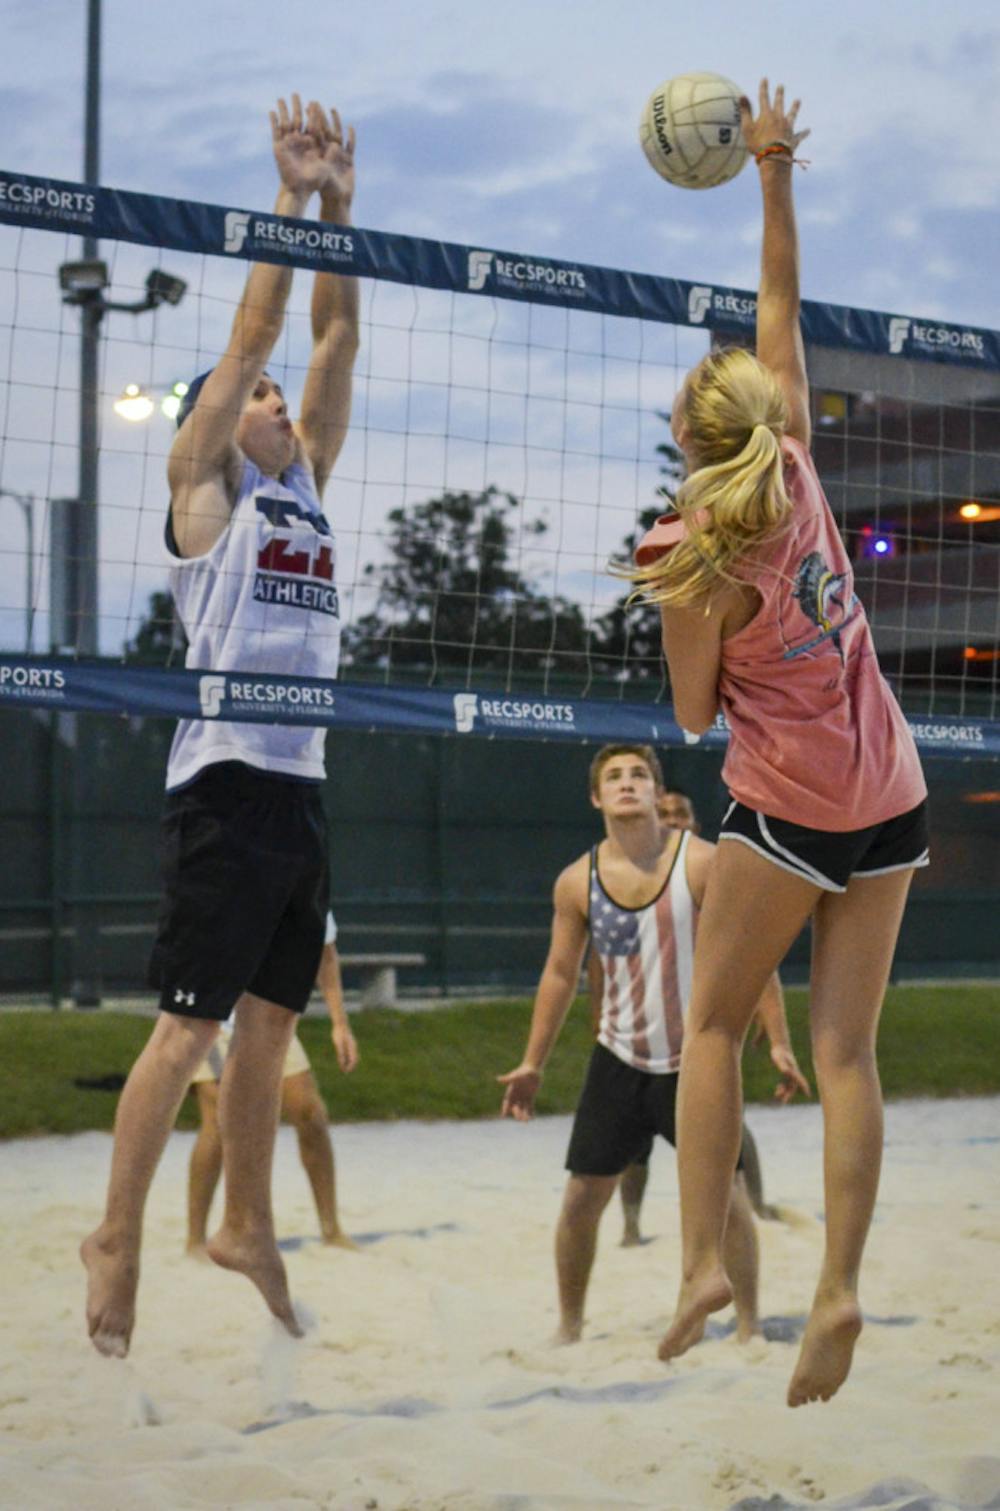 <p class="p1">Drew Baker, a 20-year-old UF economics major, prepares to block a spike from 20-year-old aerospace engineer major Shanna Wyatt. The volleyball game was part of “Spike-it-with-Senate,” a charity volleyball tournament.</p>